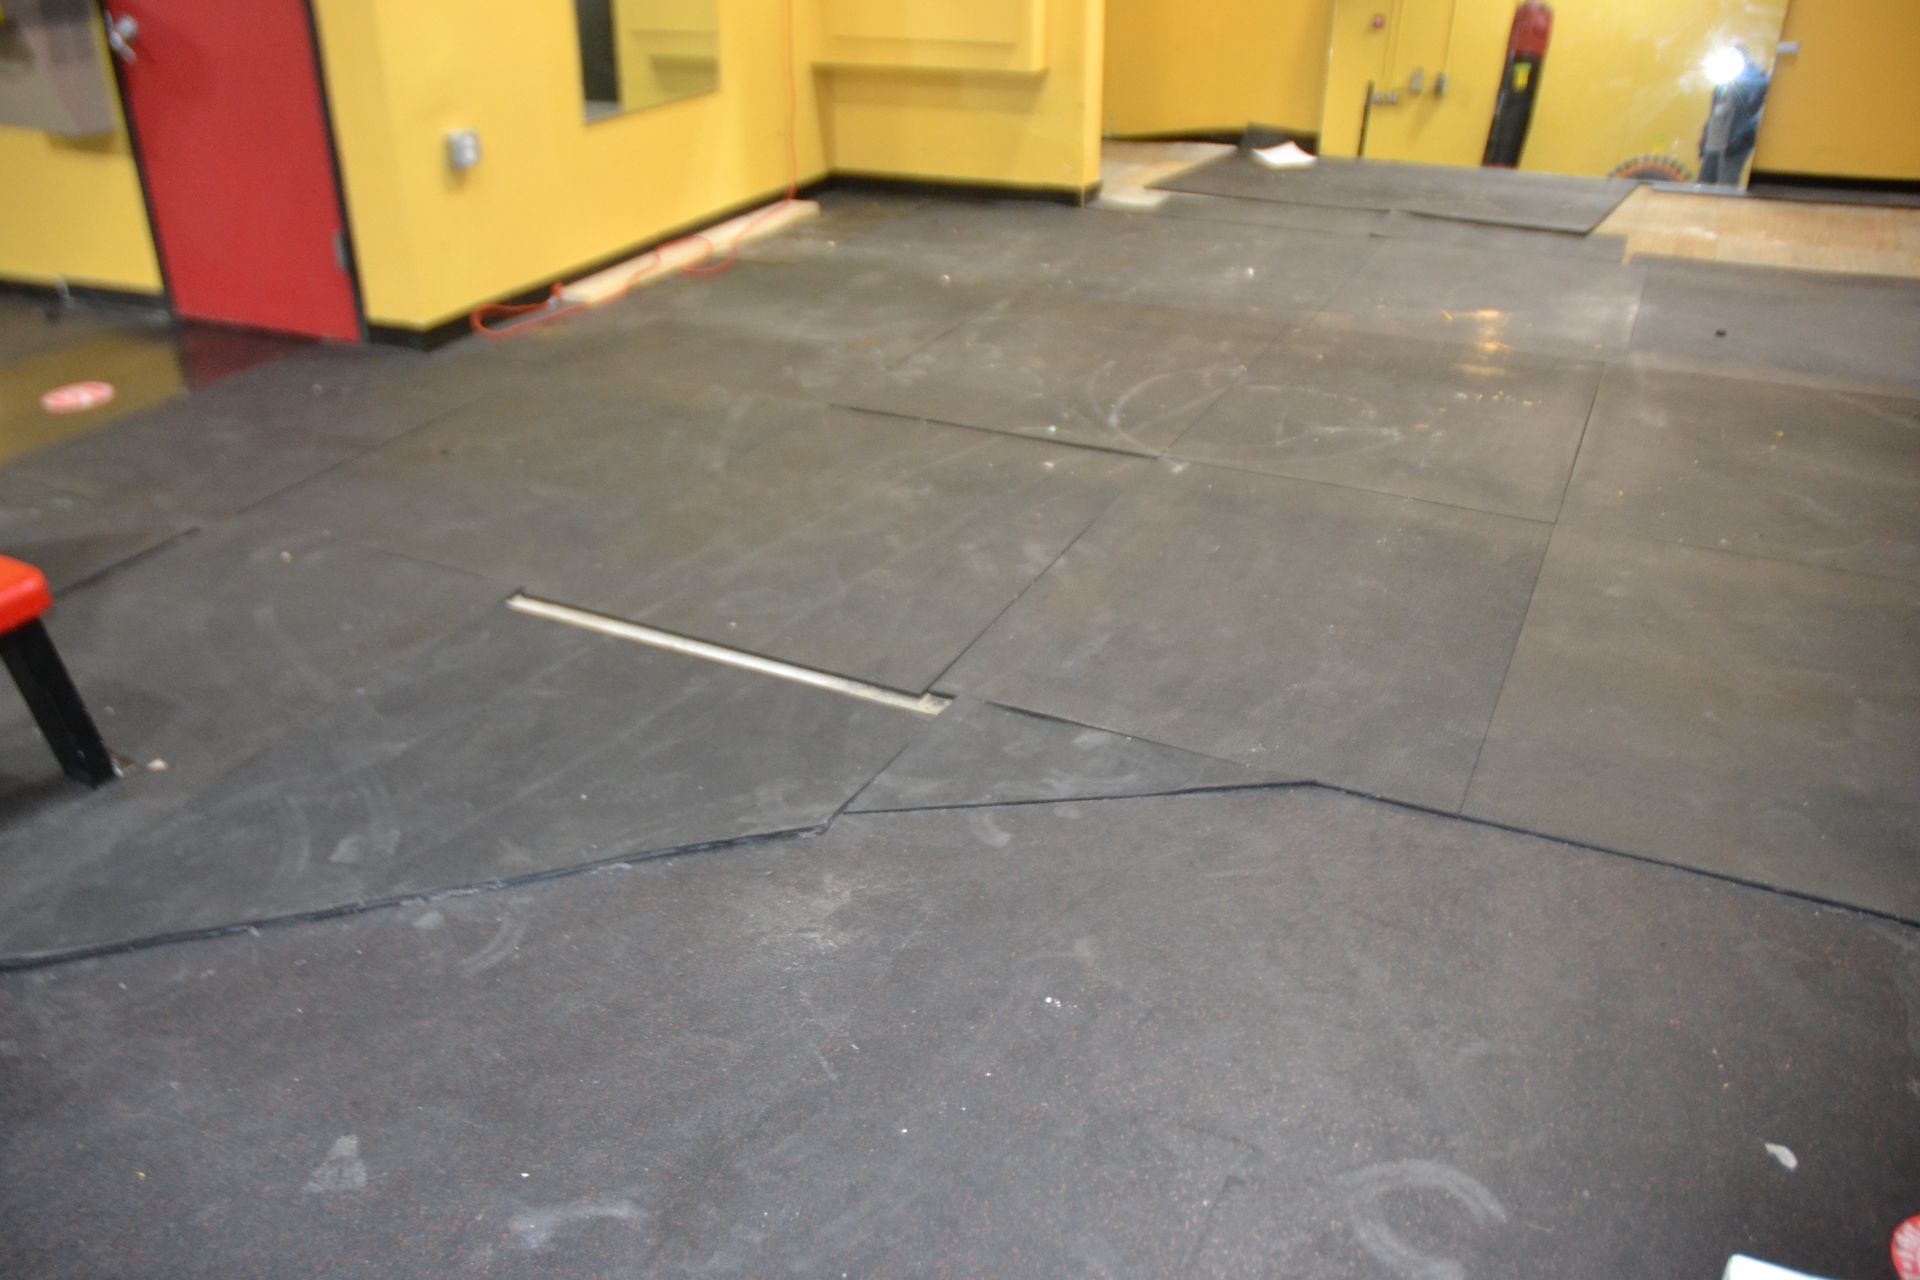 Lot - Rubber Flooring (Approximately 500 sq. ft.) - Image 2 of 4